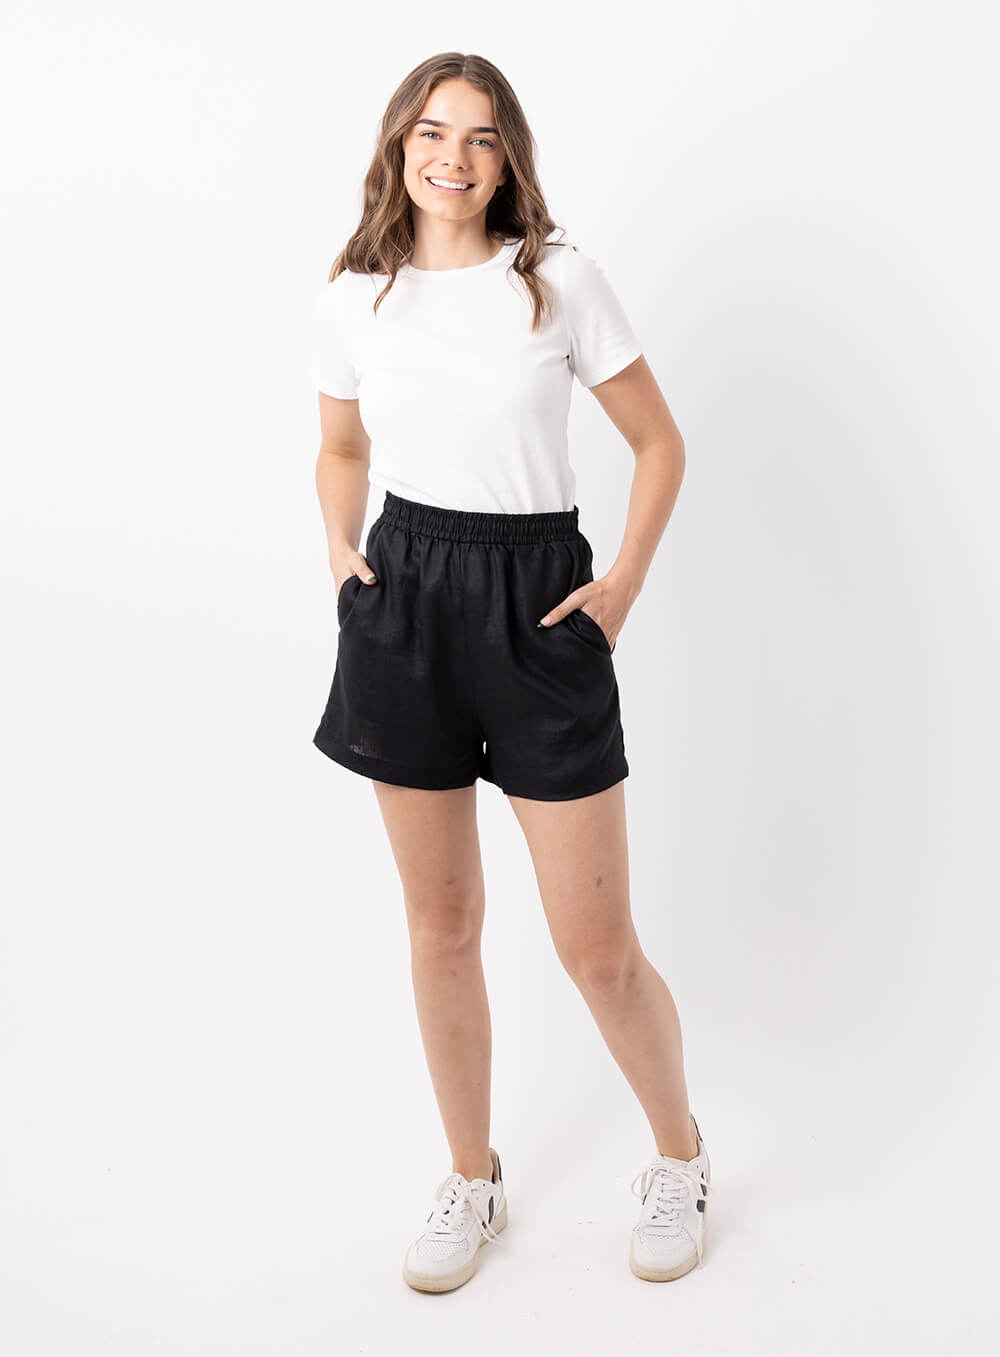 The Ali Linen Short in black is 100% breathable lien, mid thigh in length with 2 side pockets, no back pockets, elastic waistband and designed to be worn high wiasted and loose fitting